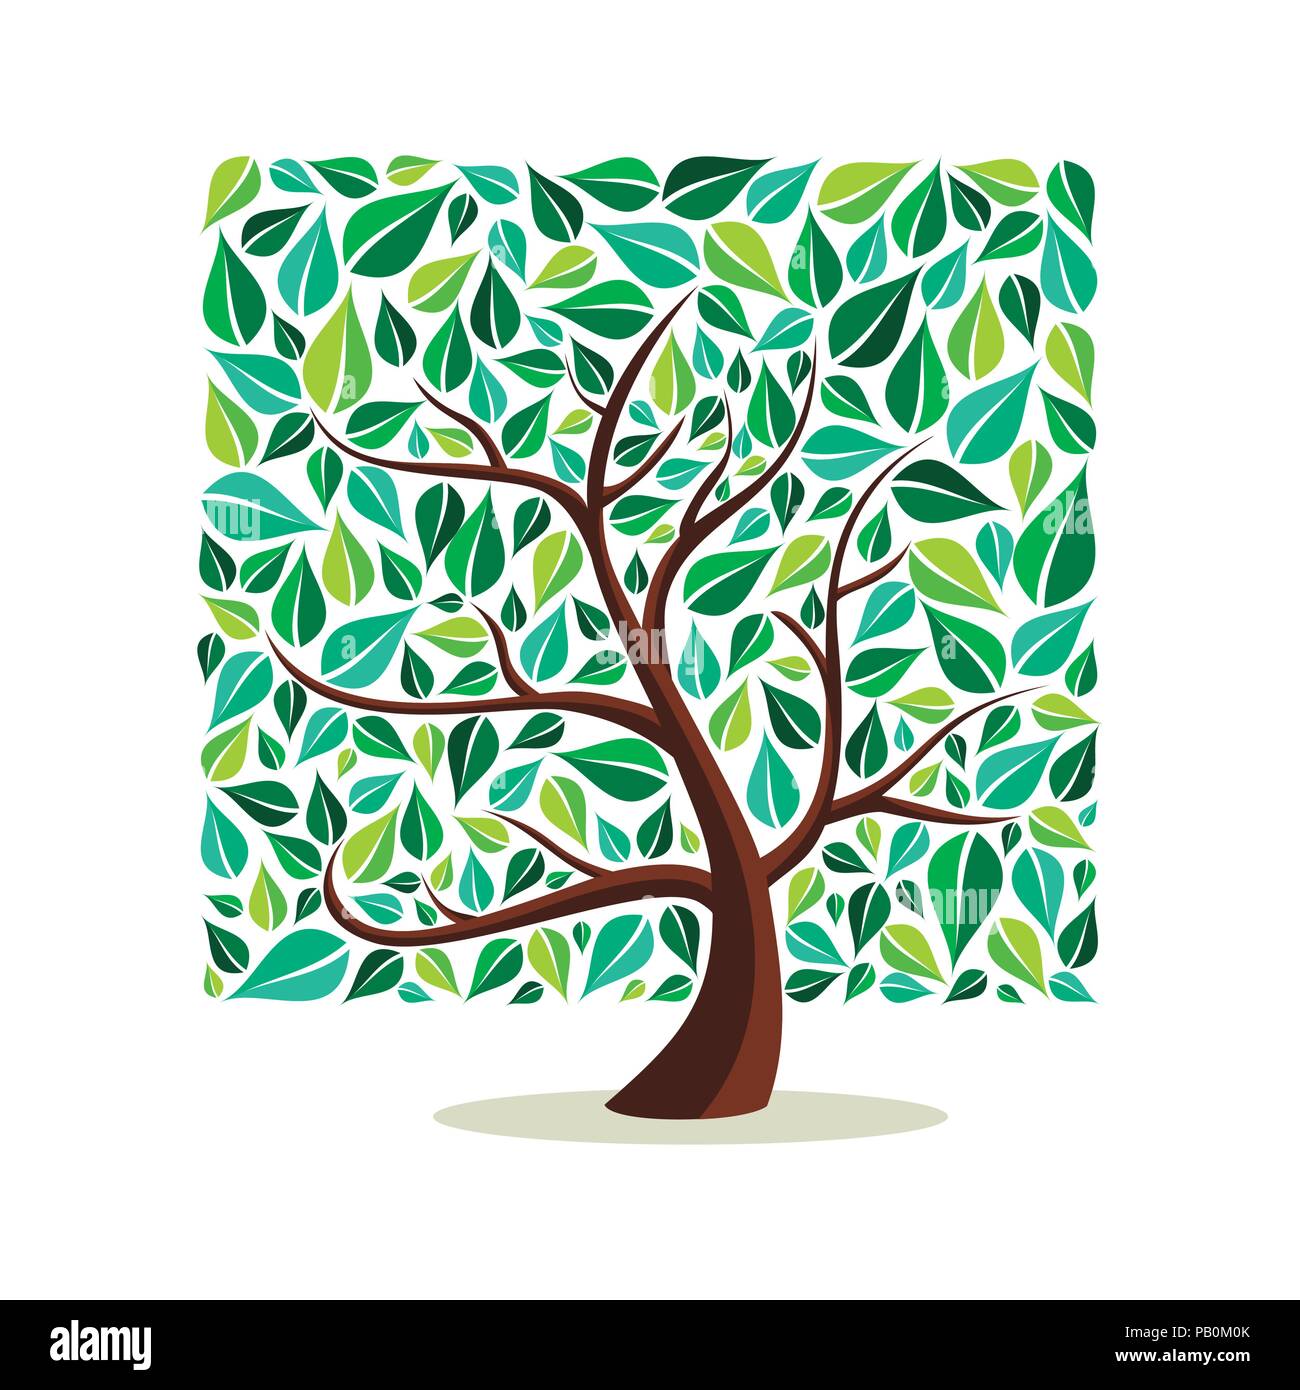 Tree made of green leaves with branches in square shape. Nature concept, Environment help or earth care. EPS10 vector. Stock Vector